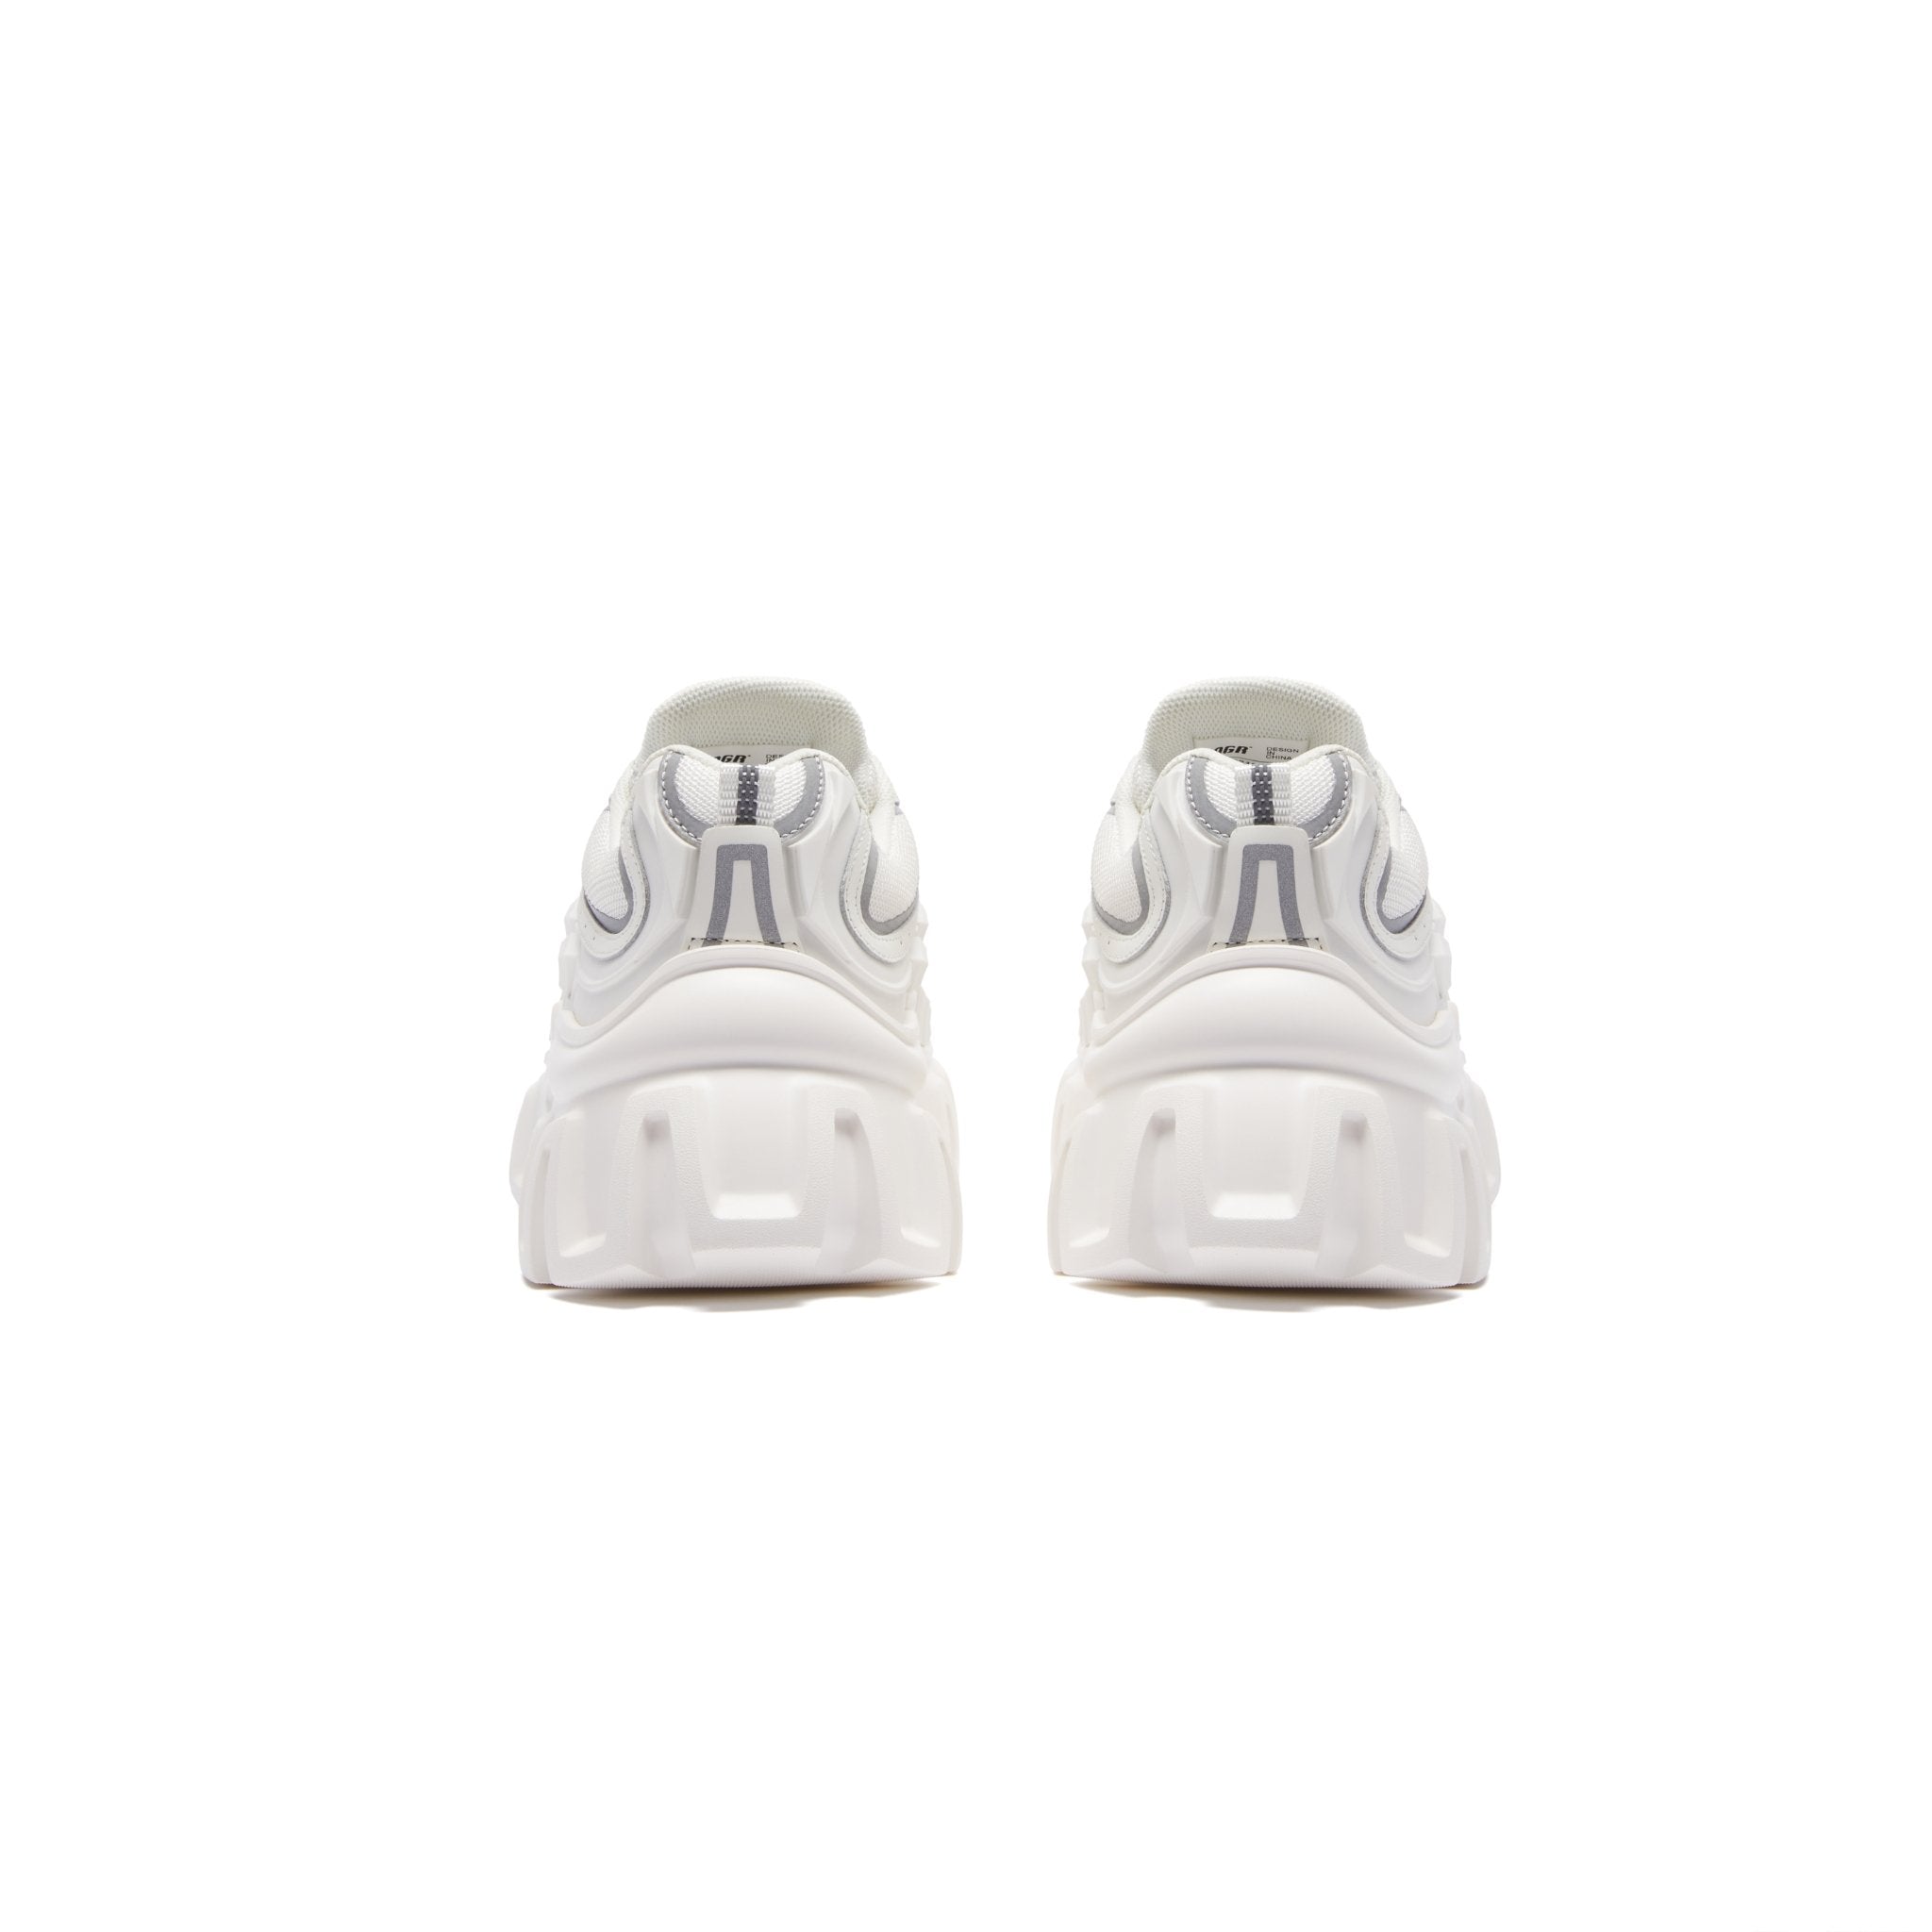 OGR MECHA Heavy Collection Shoes White | MADA IN CHINA